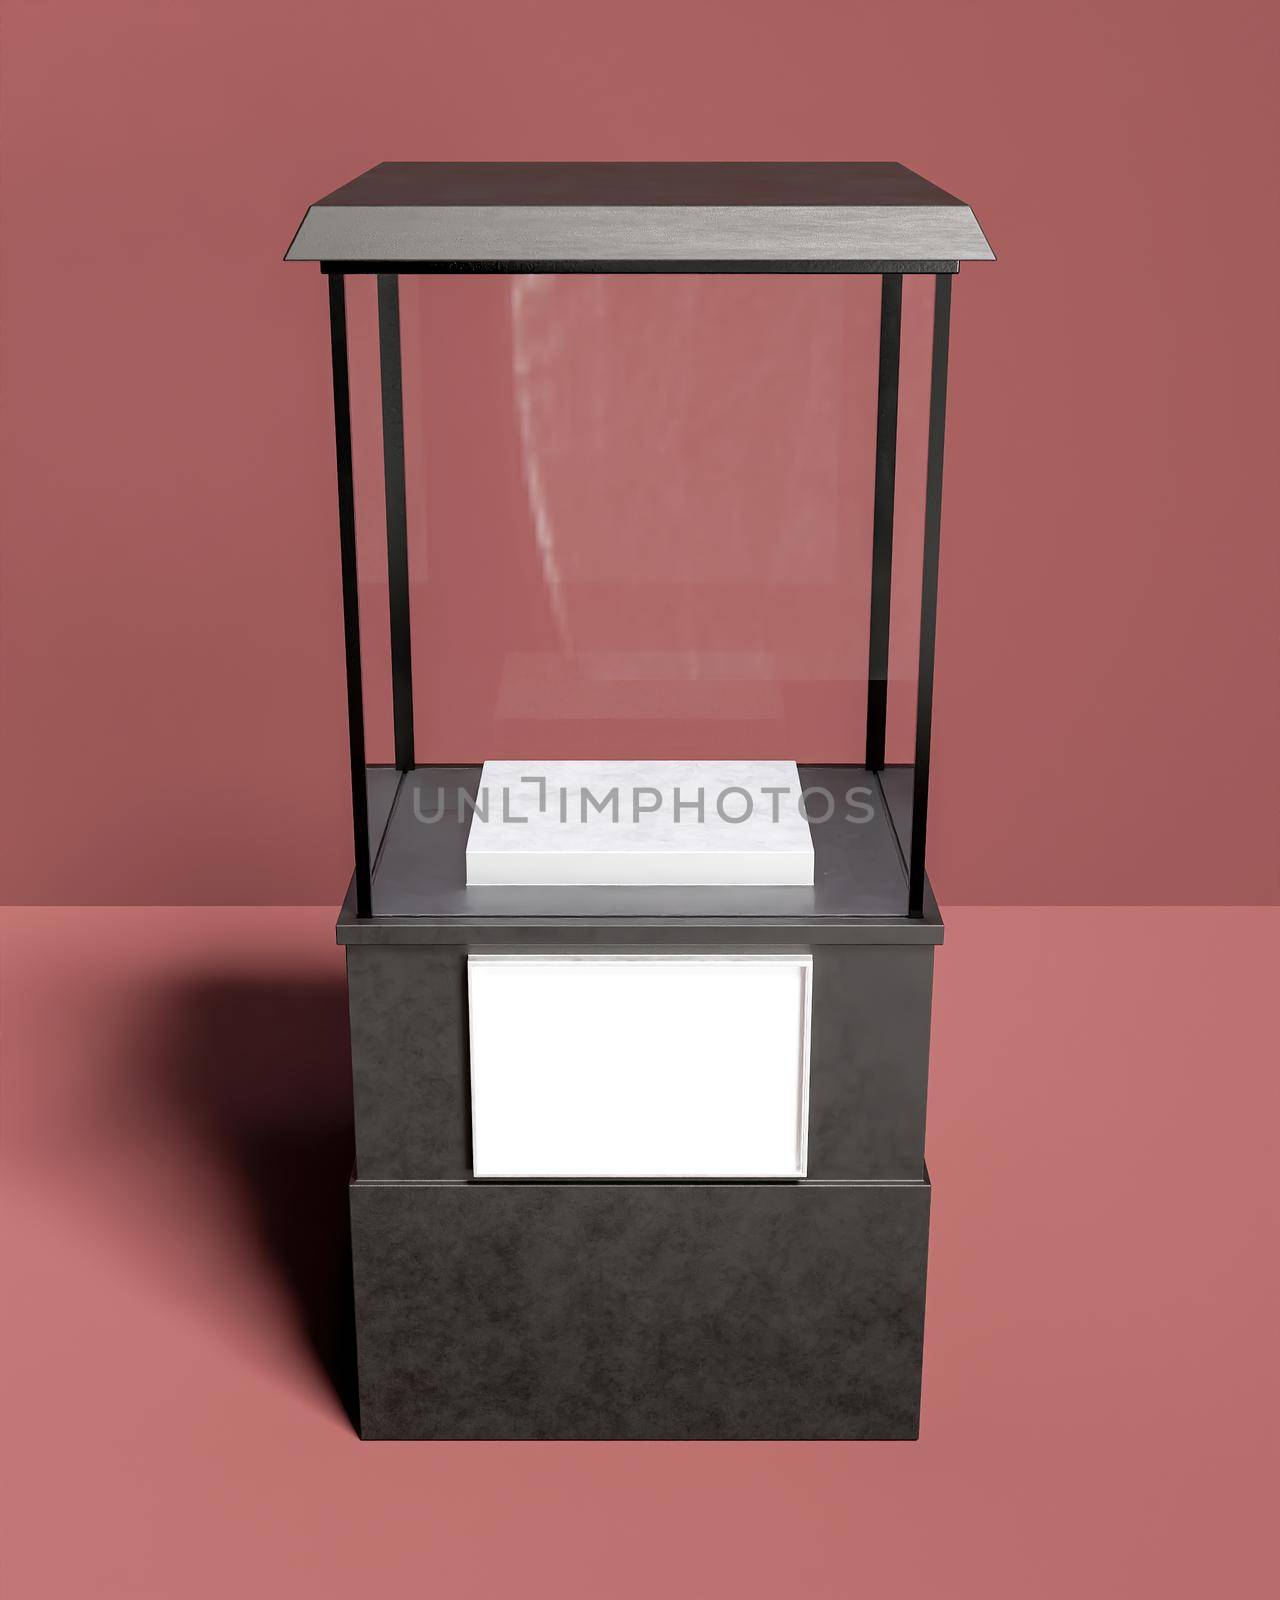 square showcase with glass and lower sign for product display. 3d rendering